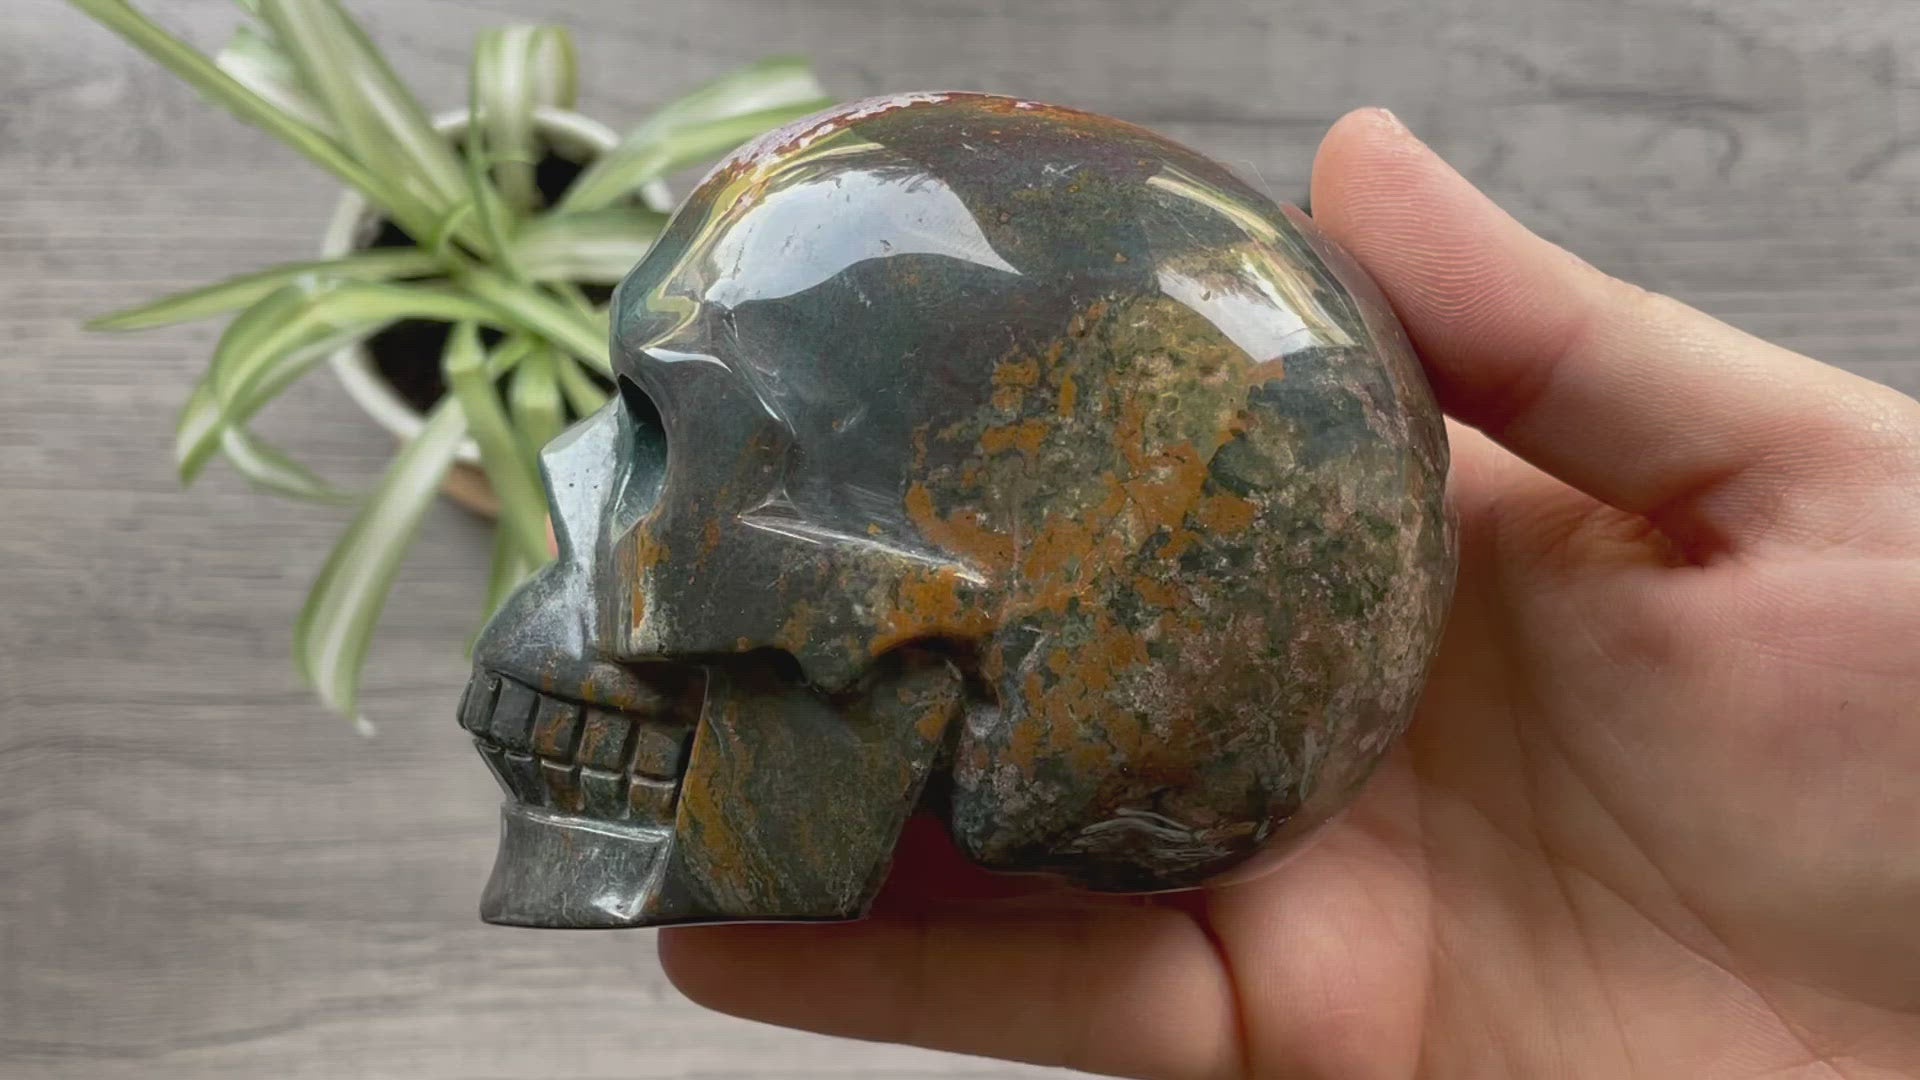 Pictured is a large skull carved out of ocean jasper or river jasper.